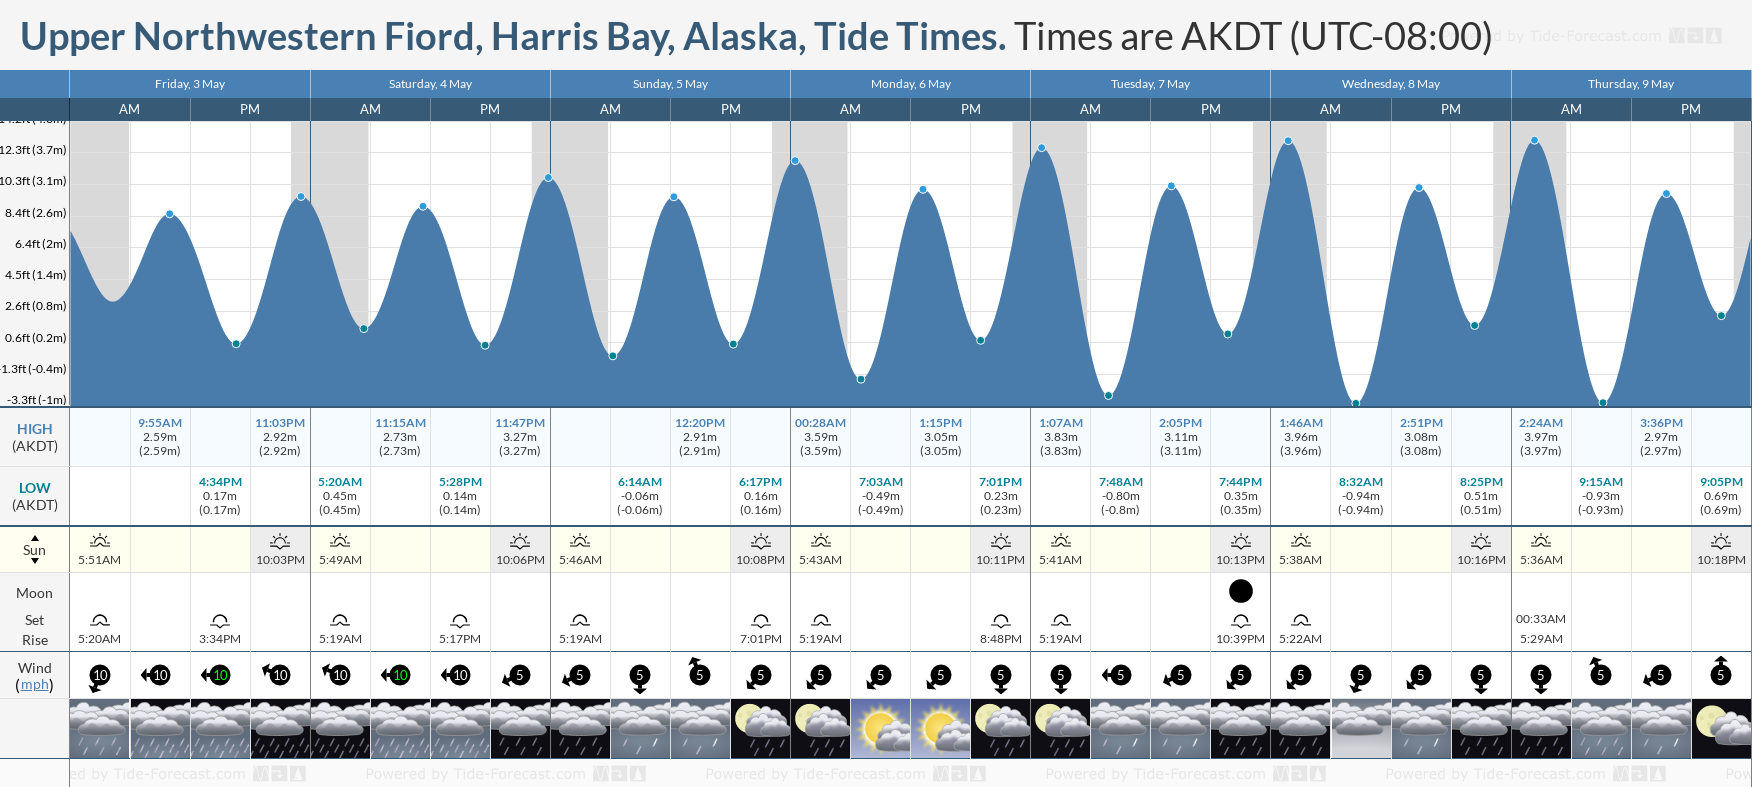 Upper Northwestern Fiord, Harris Bay, Alaska Tide Chart including high and low tide tide times for the next 7 days